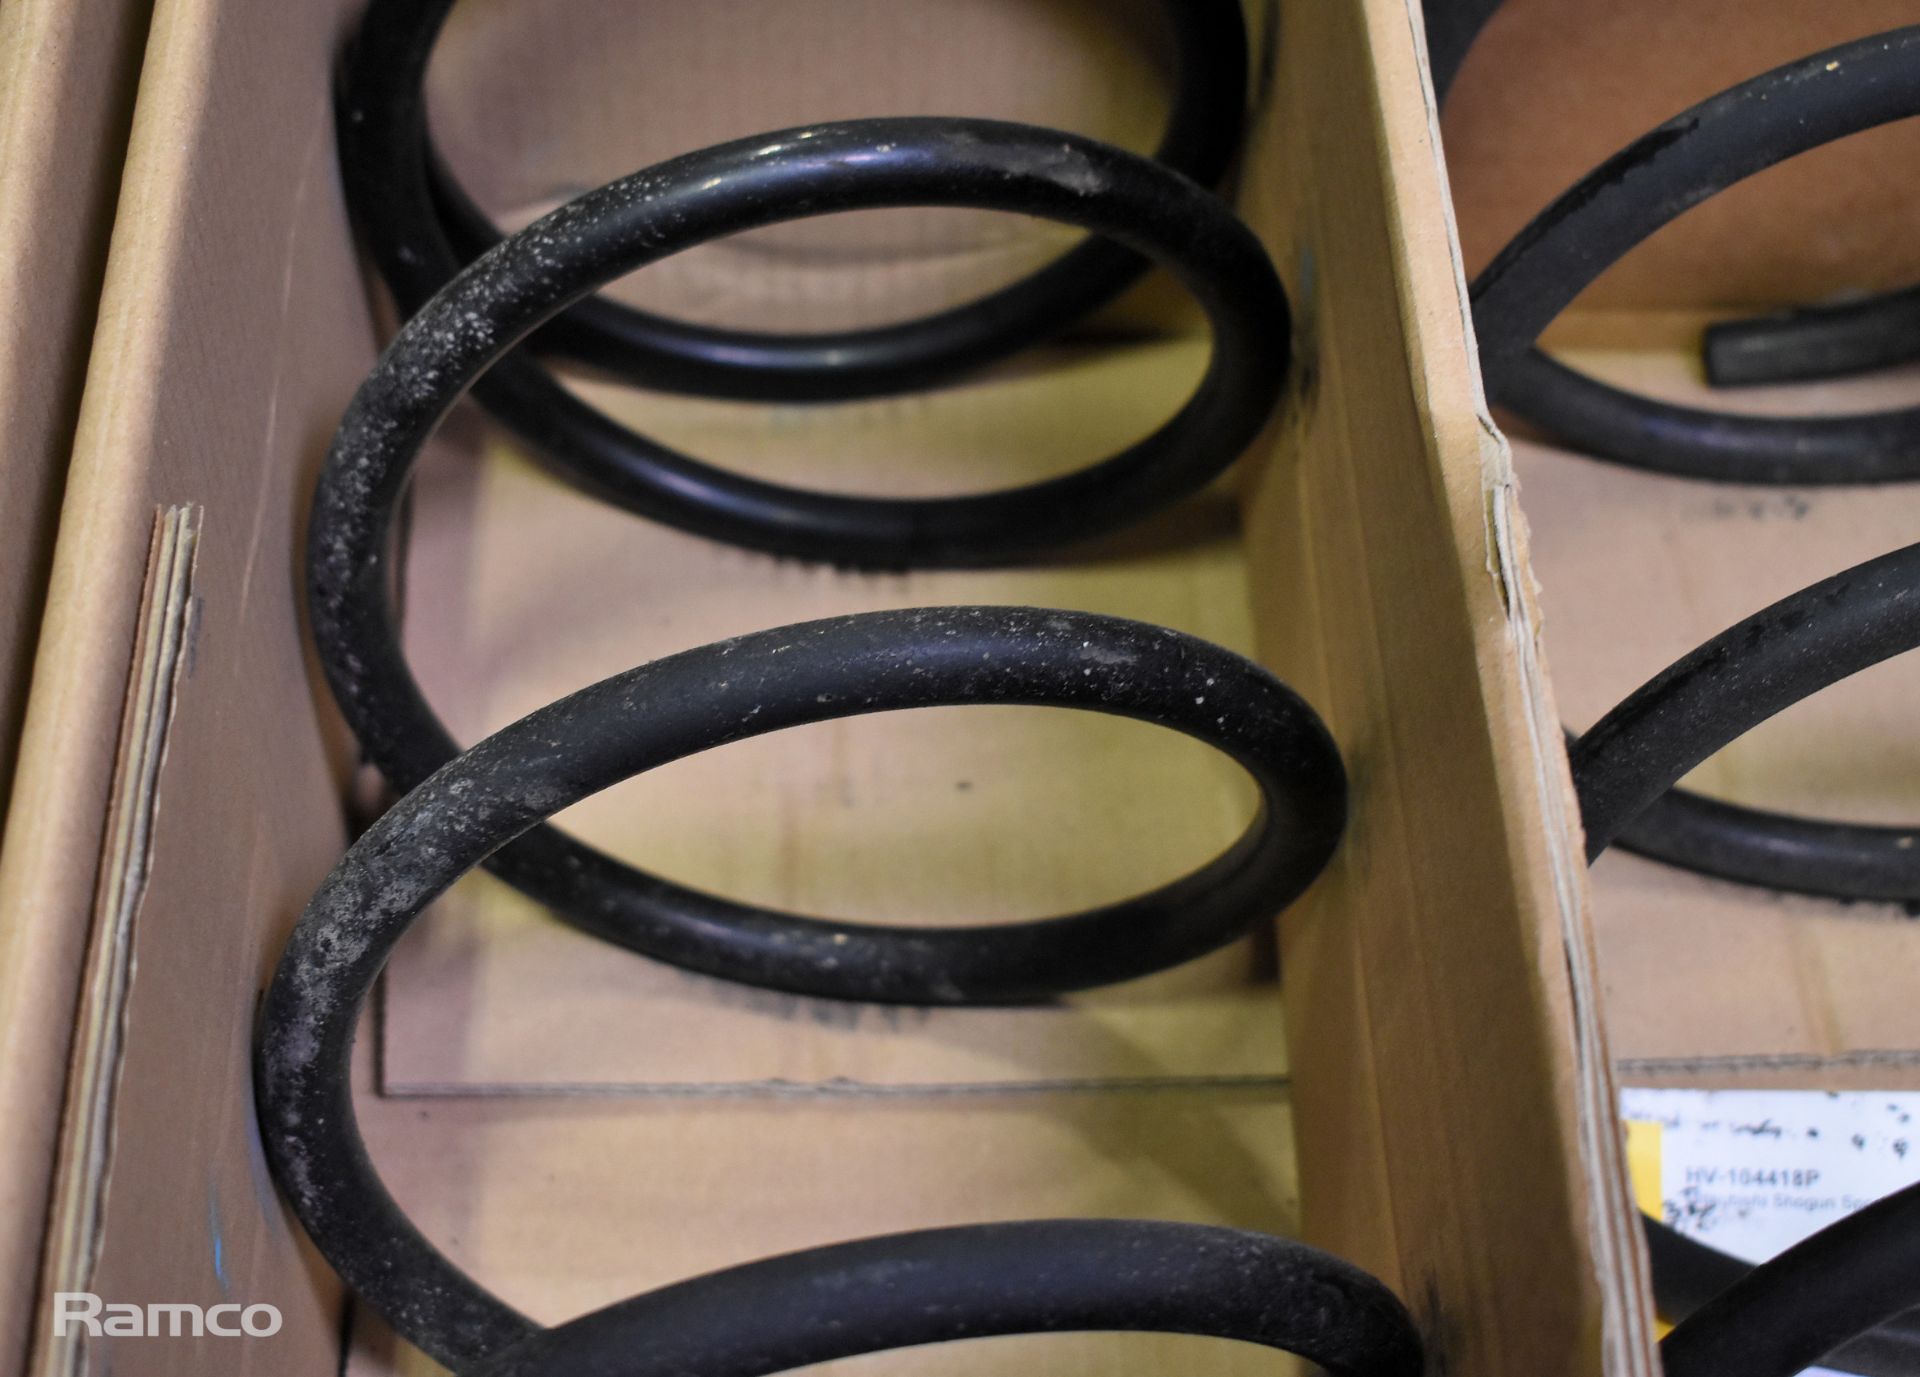 2x boxes of MAD Suspension Systems HV-104418P Mitsubishi Shogun Sport reinforced rear springs - Image 2 of 3